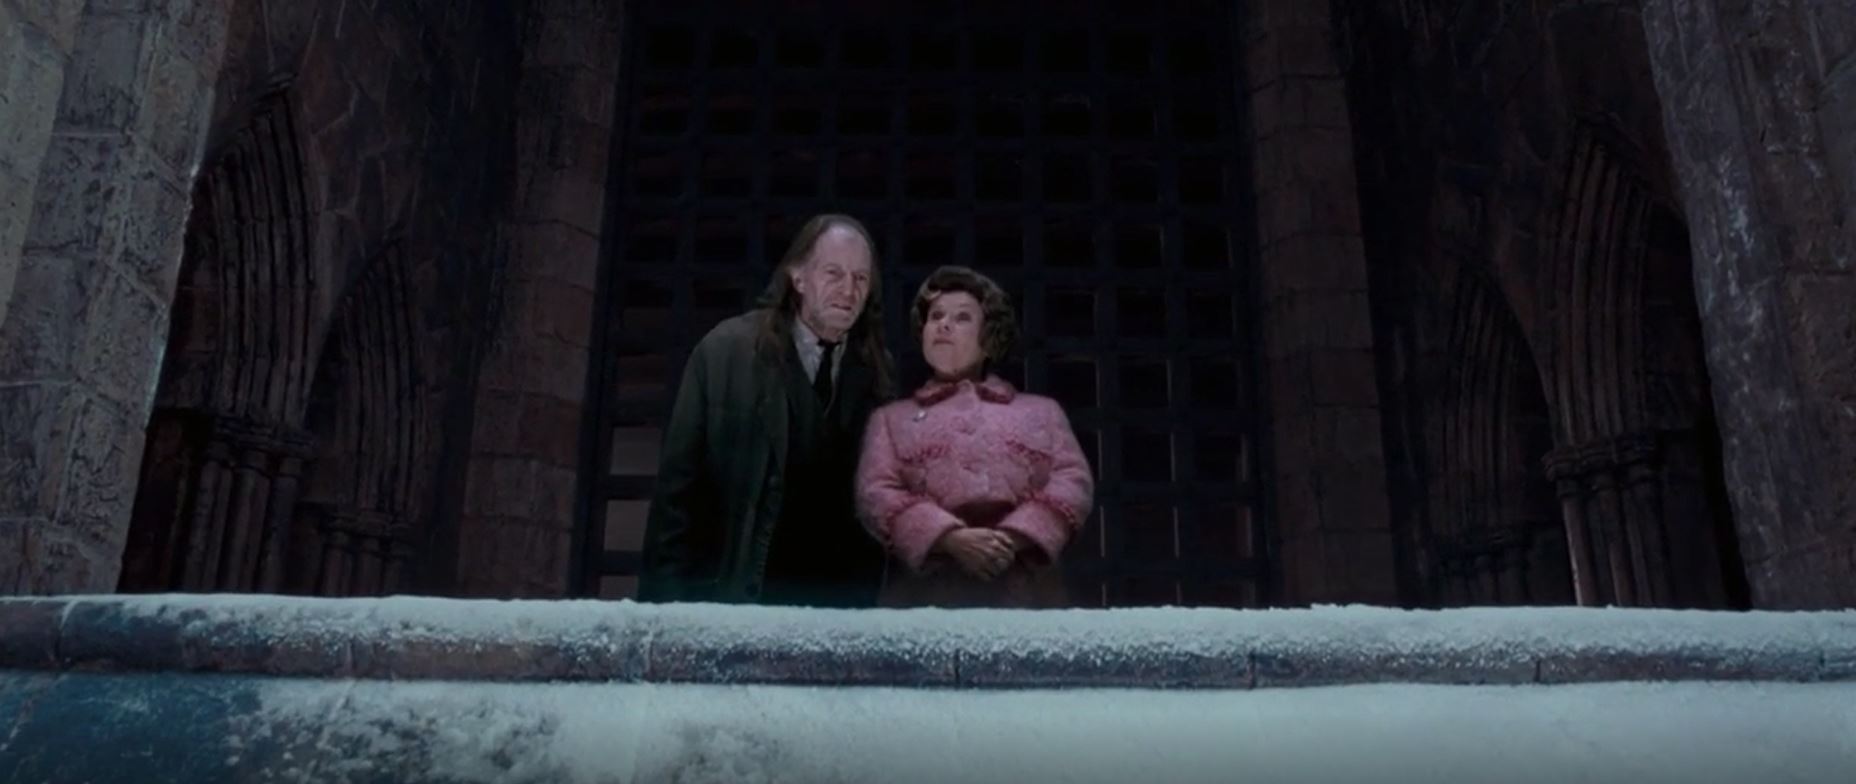 harry potter and the order of the phoenix filtch and umbridge